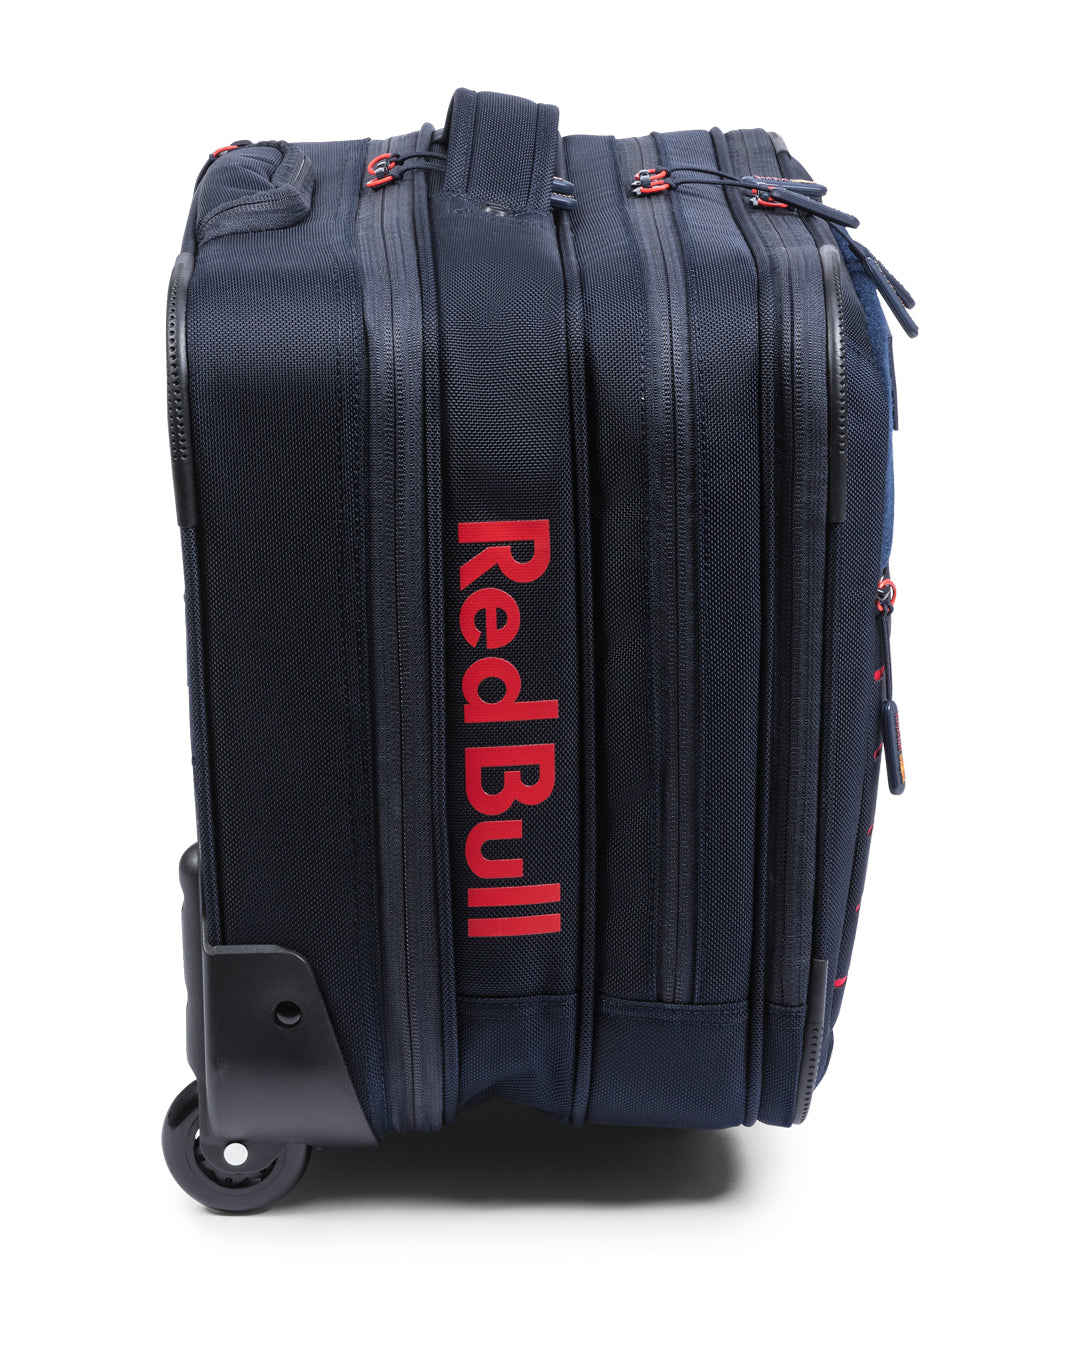 EQUIPAJE DE MANO &quot;CARRY ON&quot; PARA CABINA | CARRY ON LUGGAGE ORACLE RED BULL RACING